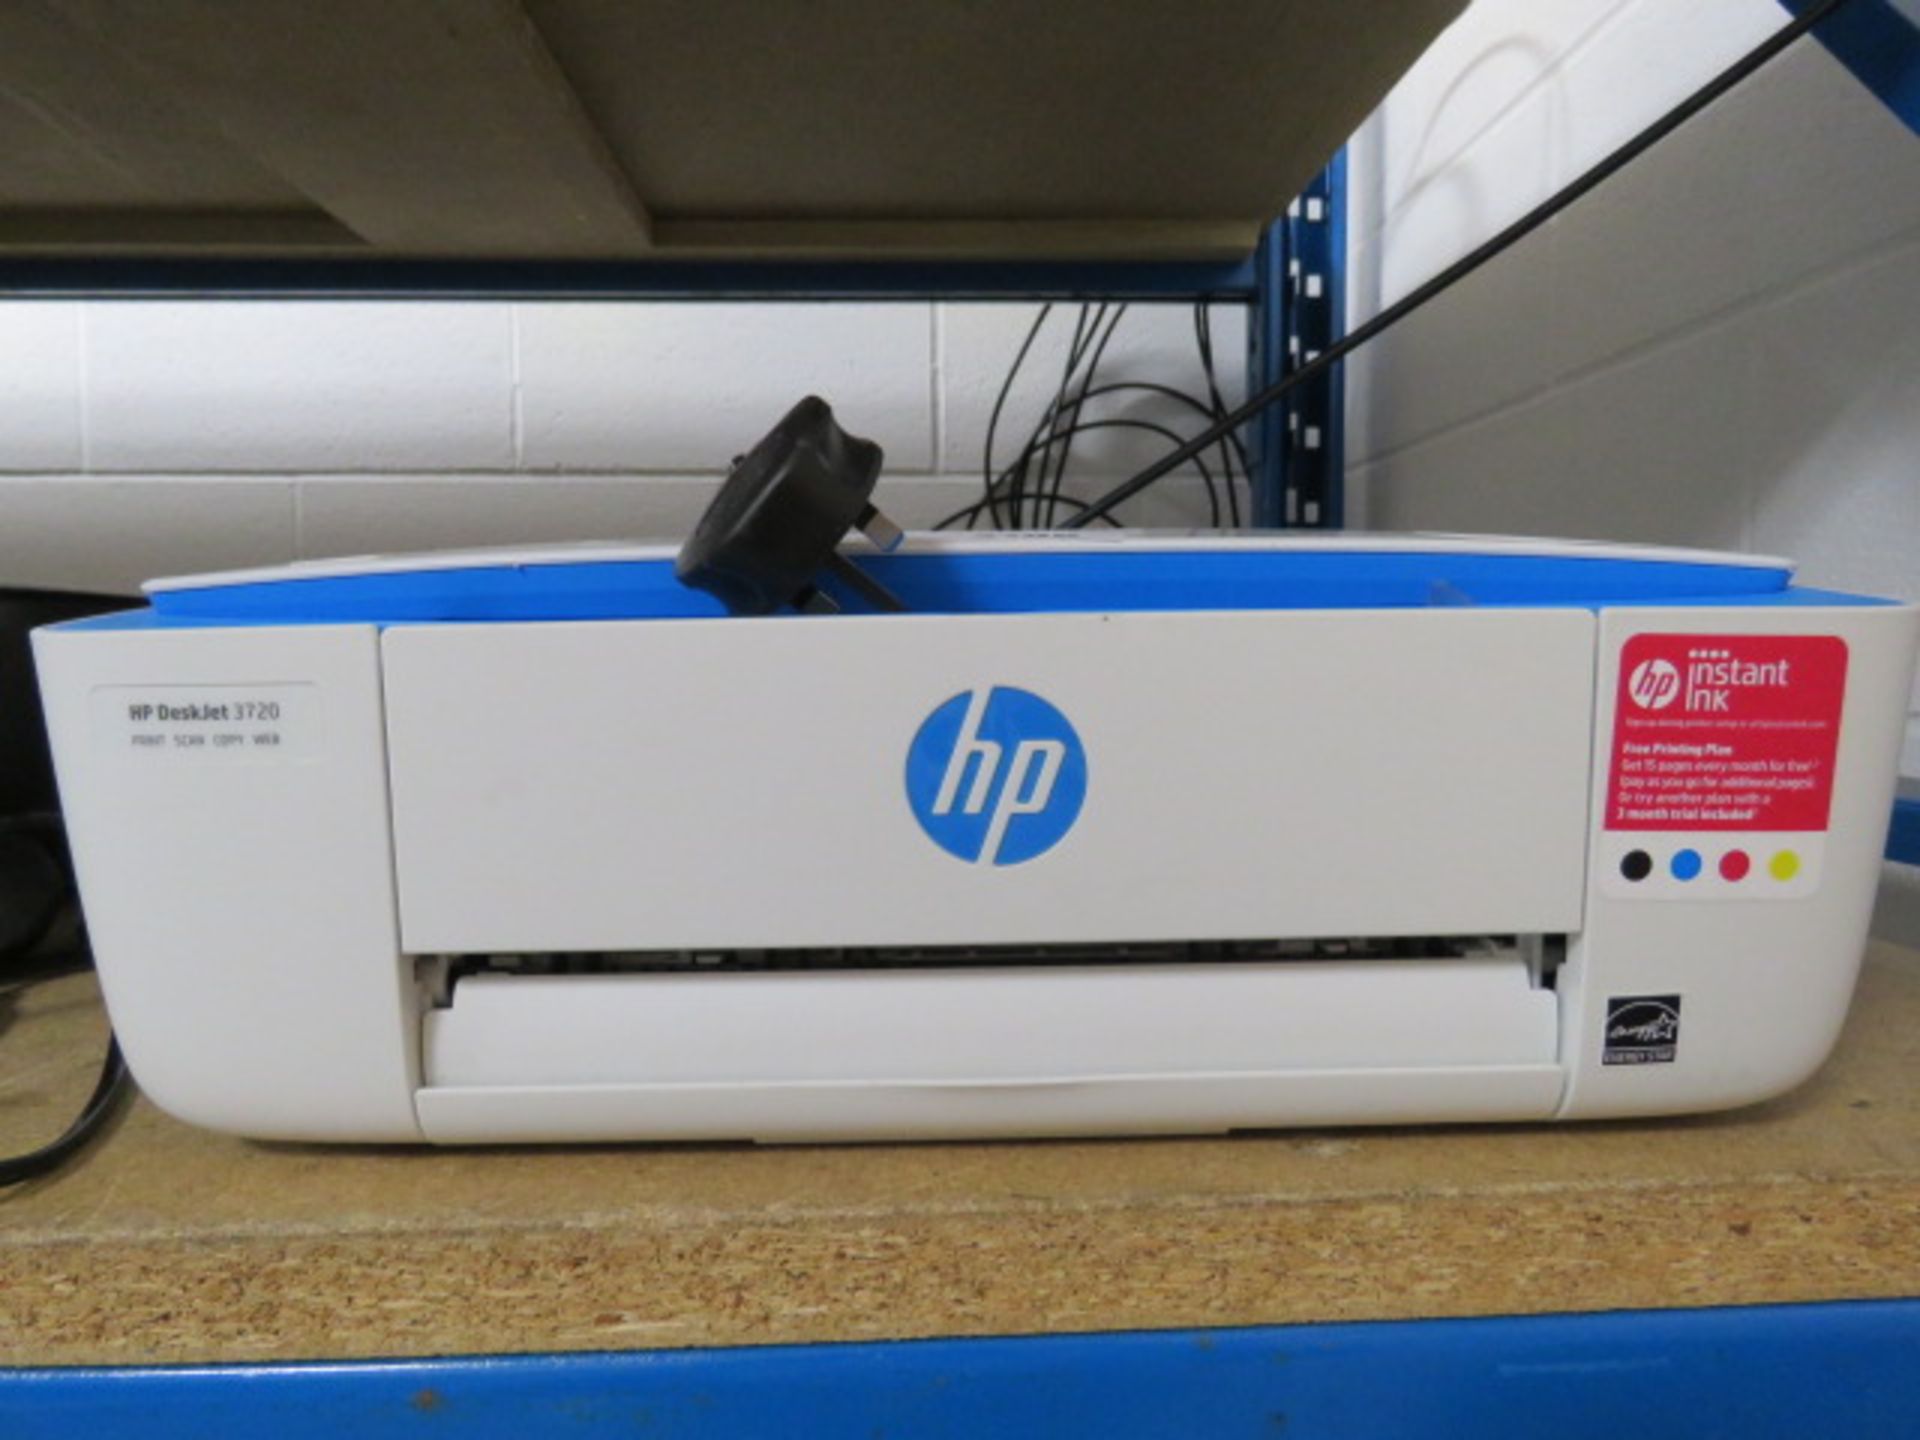 2 HP Deskjet printers to include a HP 3720